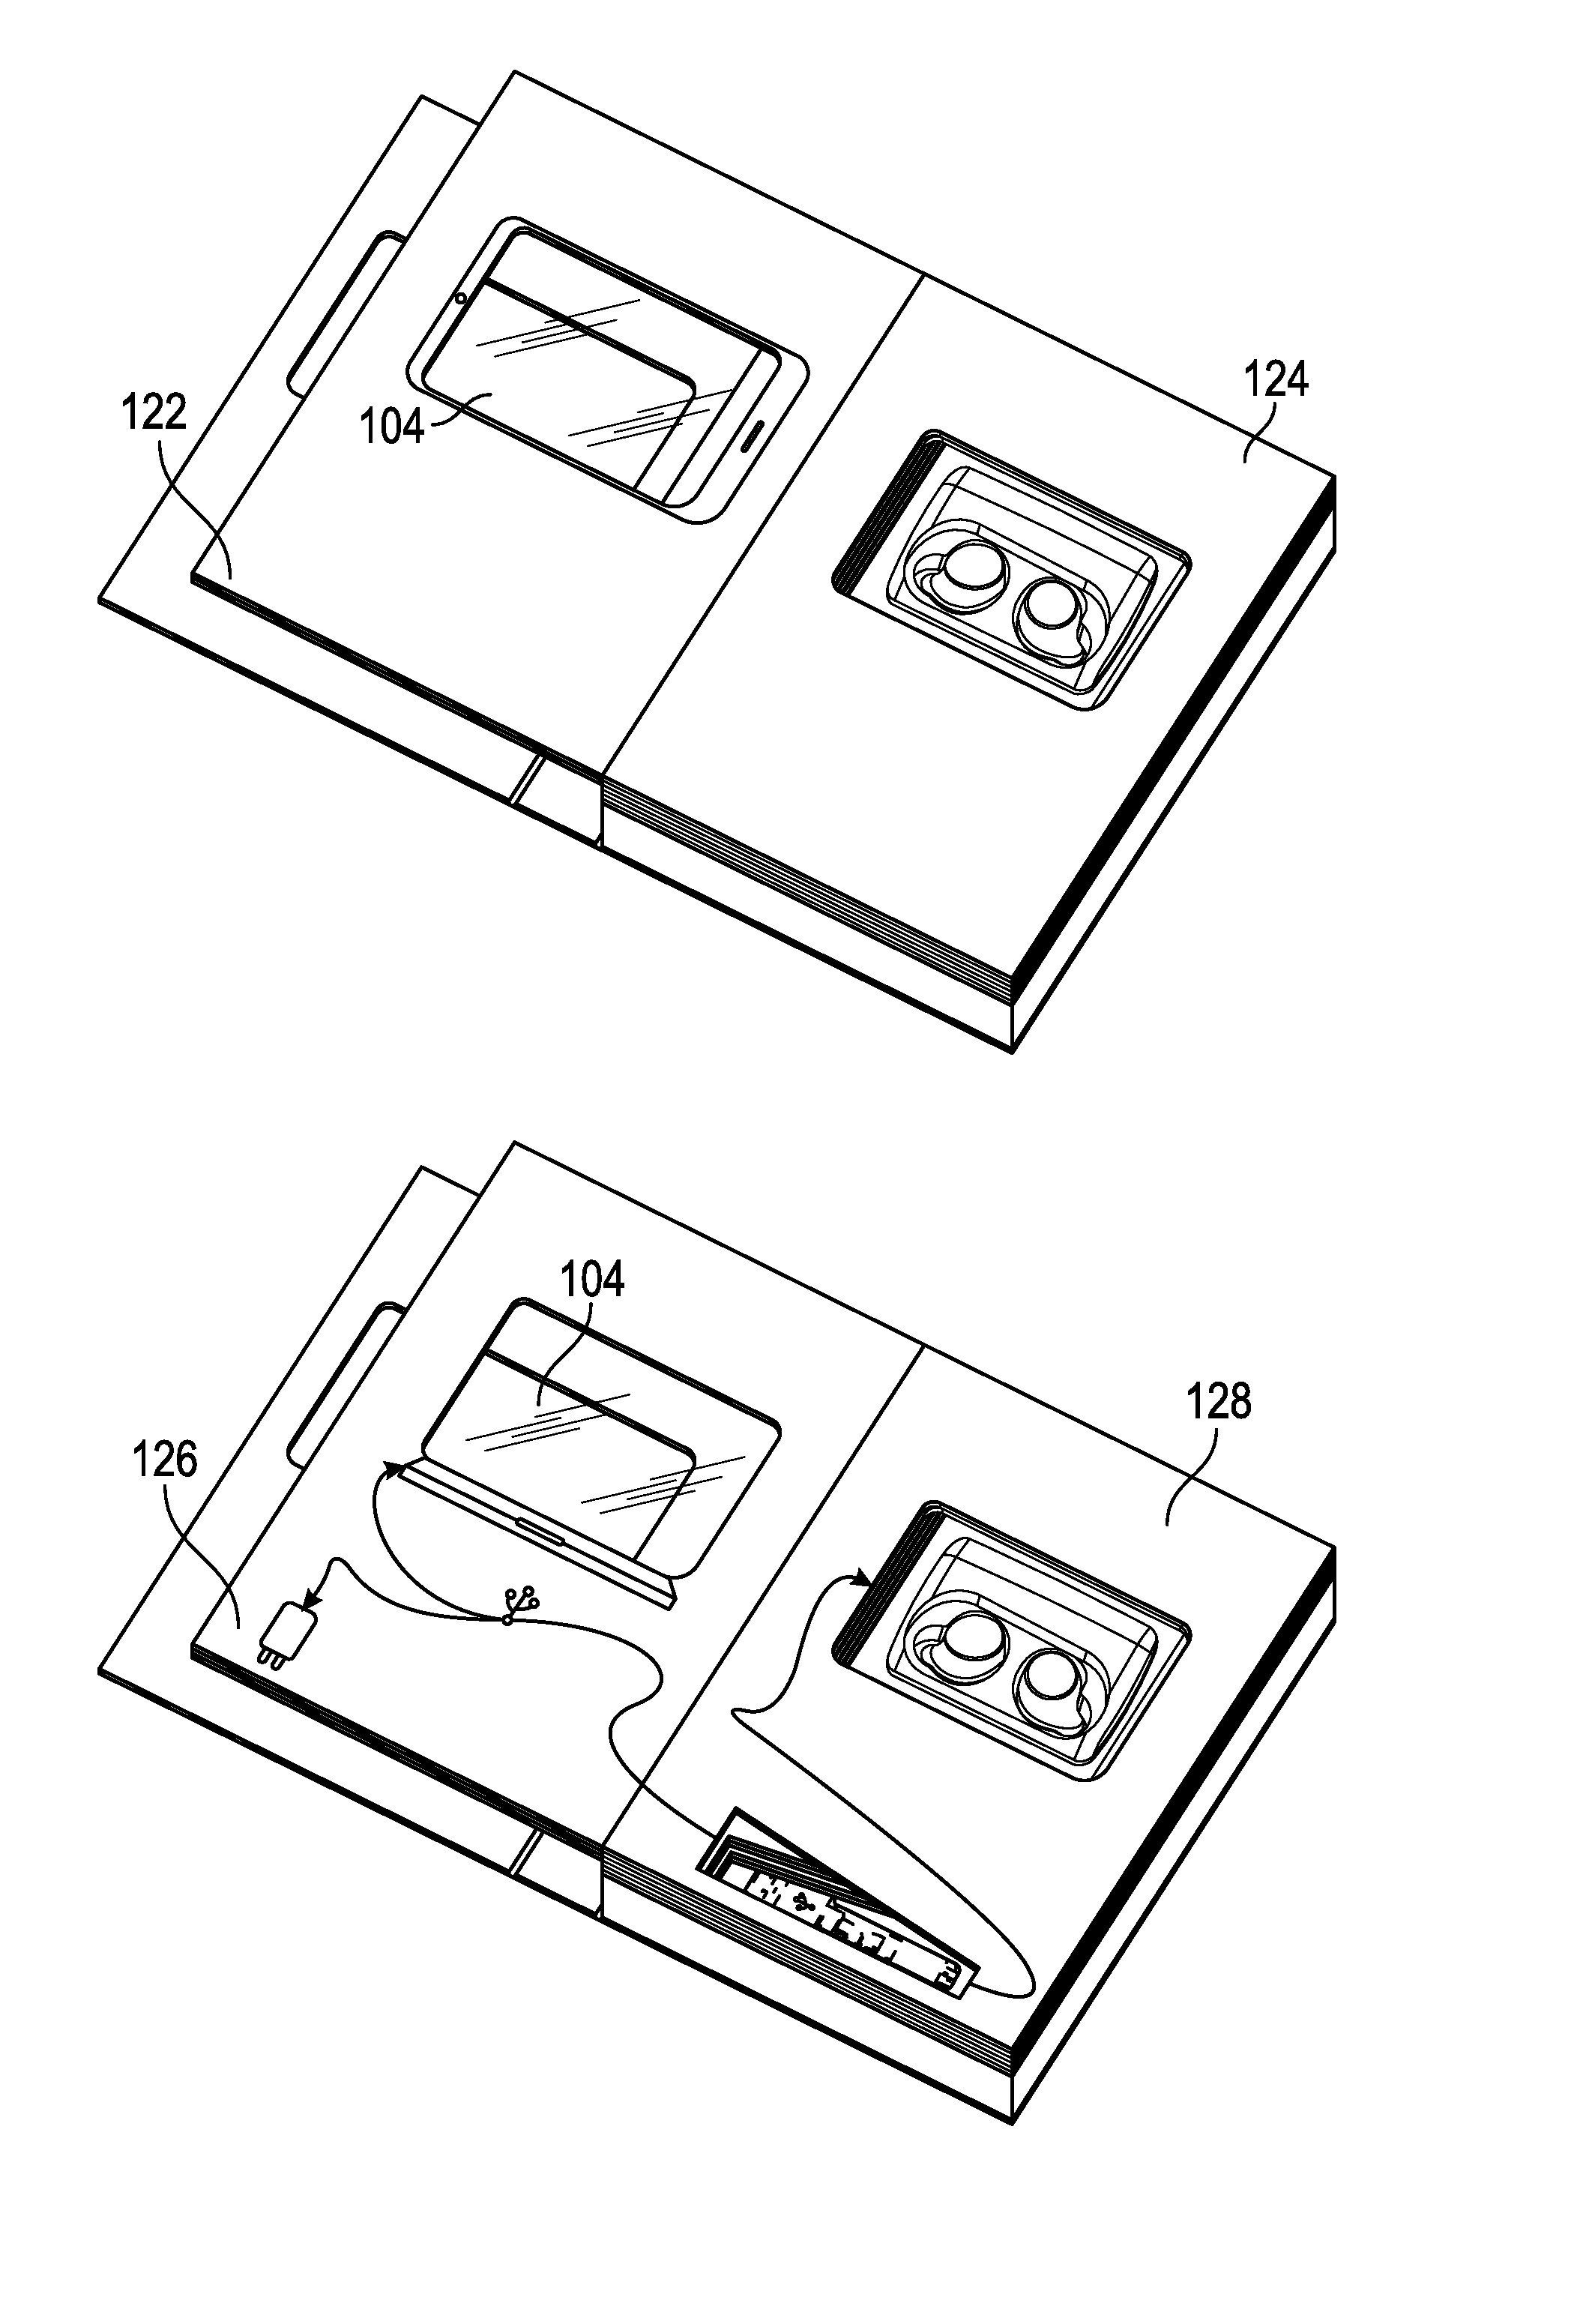 Interactive Product Packaging System and Method